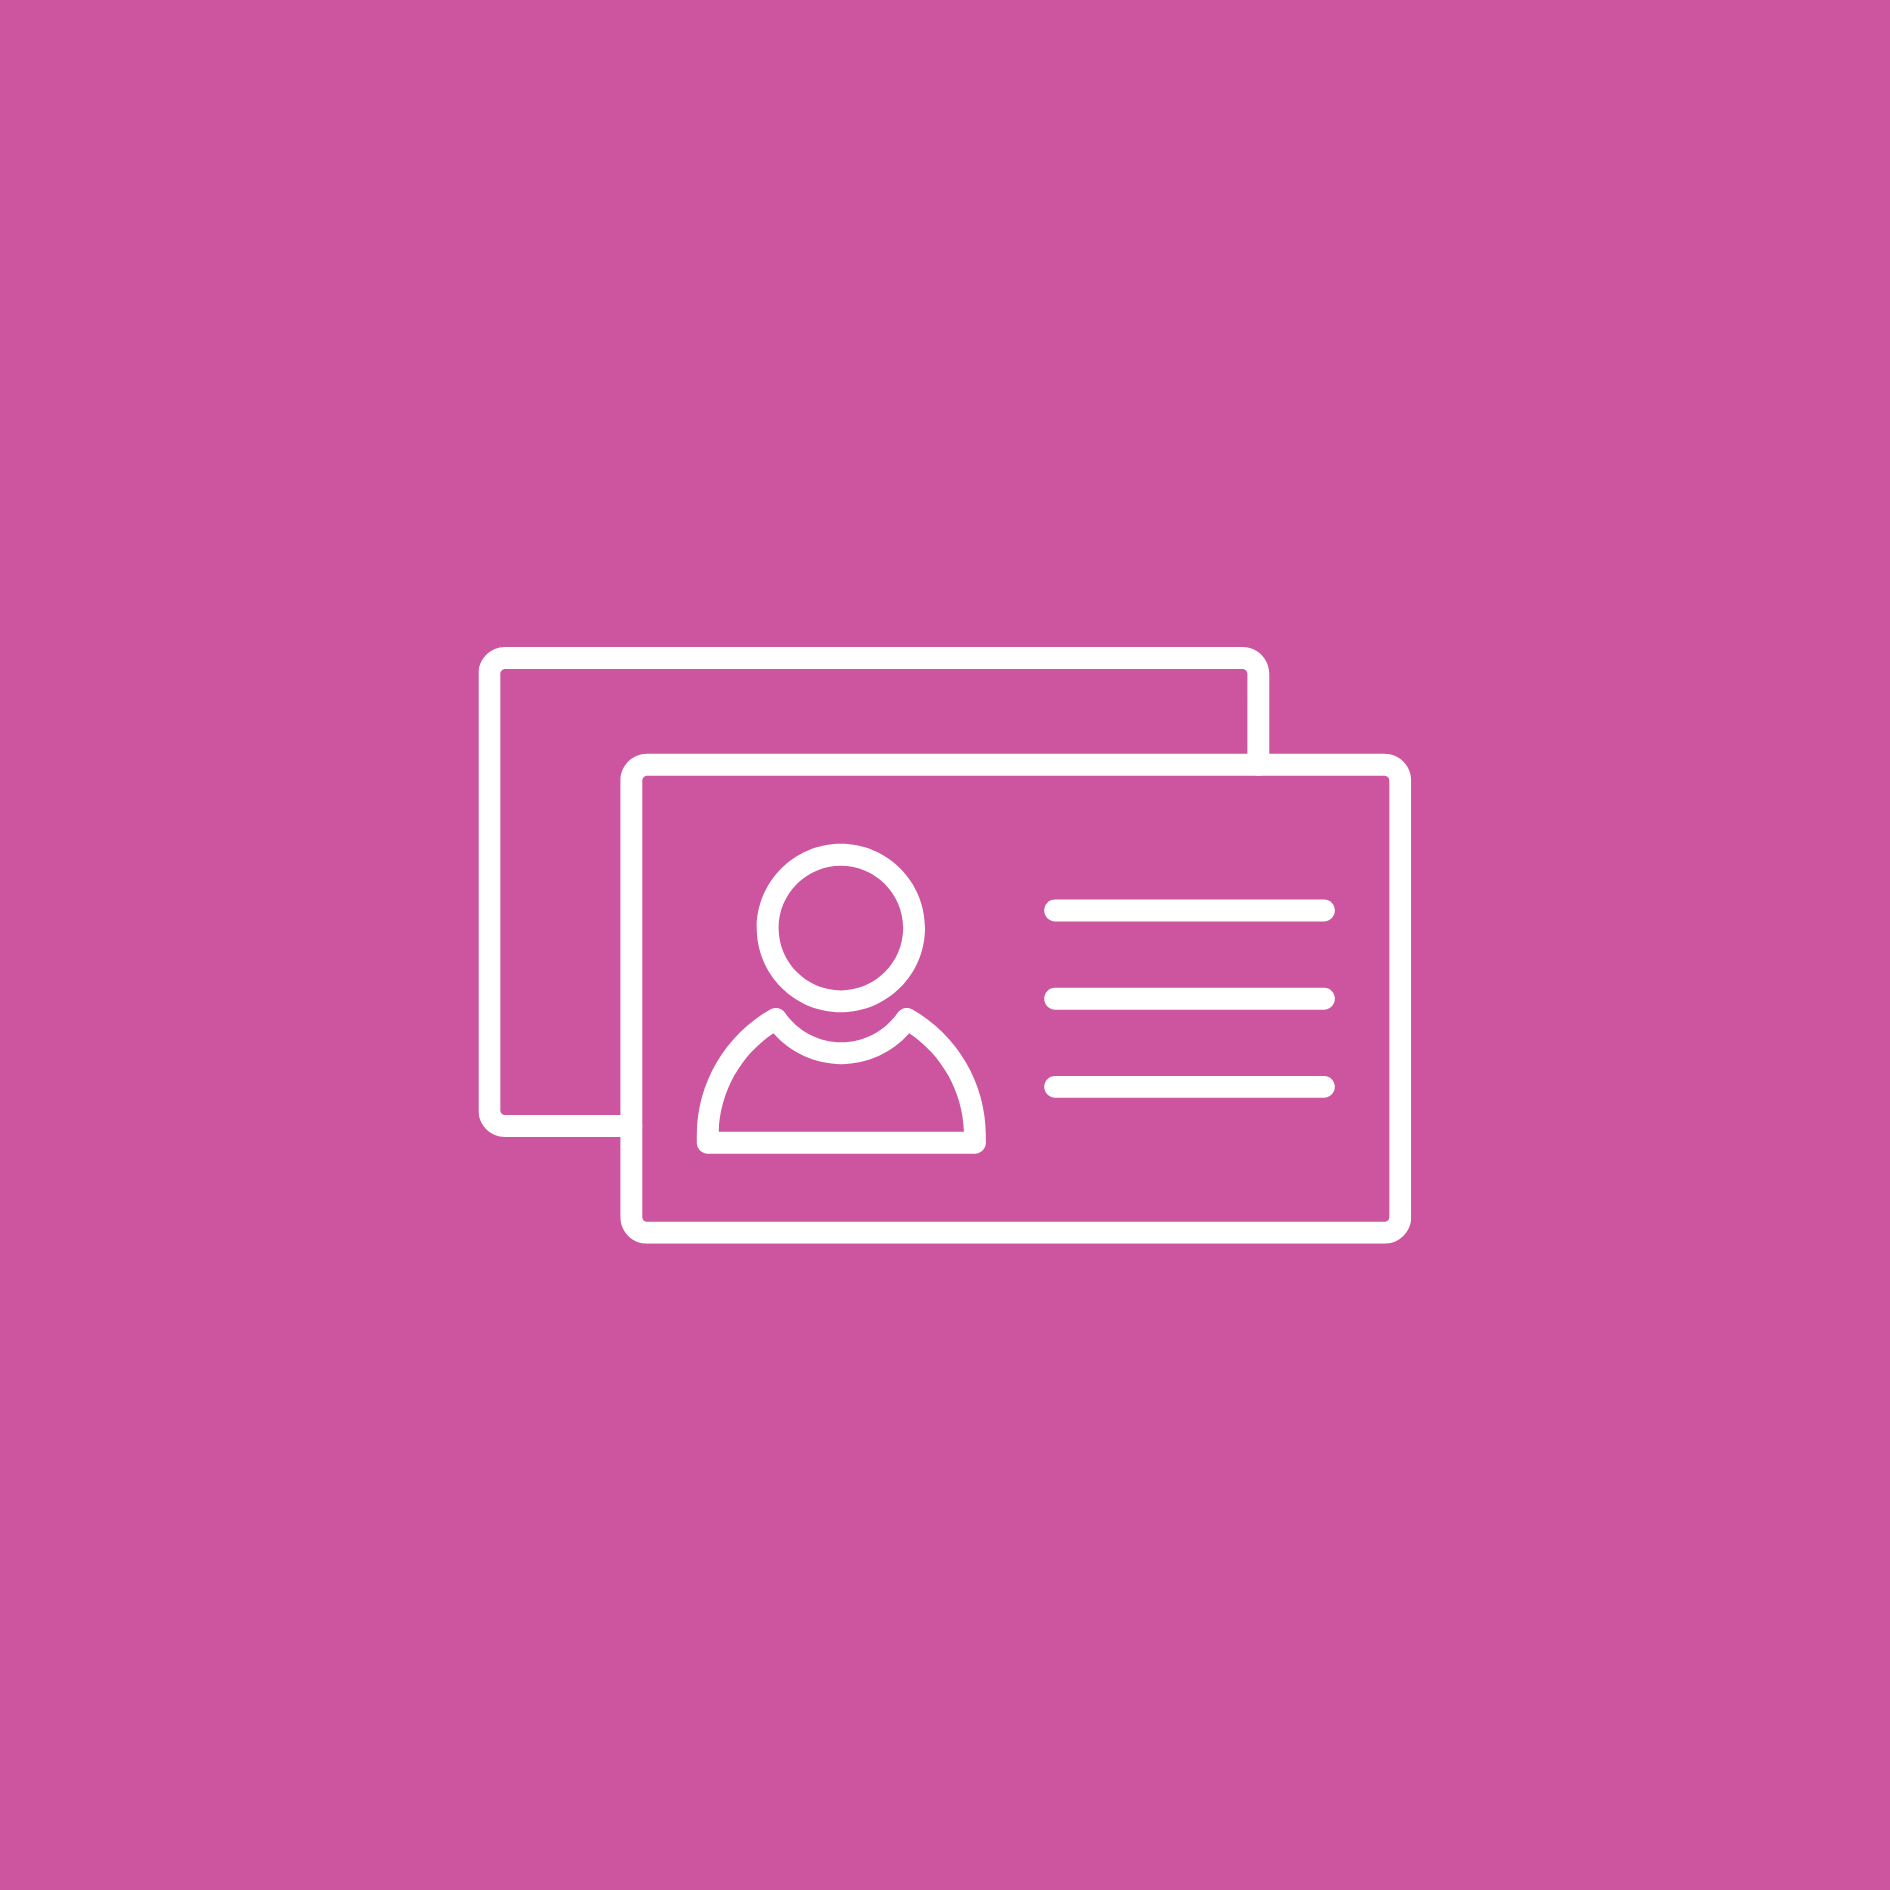 A line icon of two business cards with a person on them on a pink background.